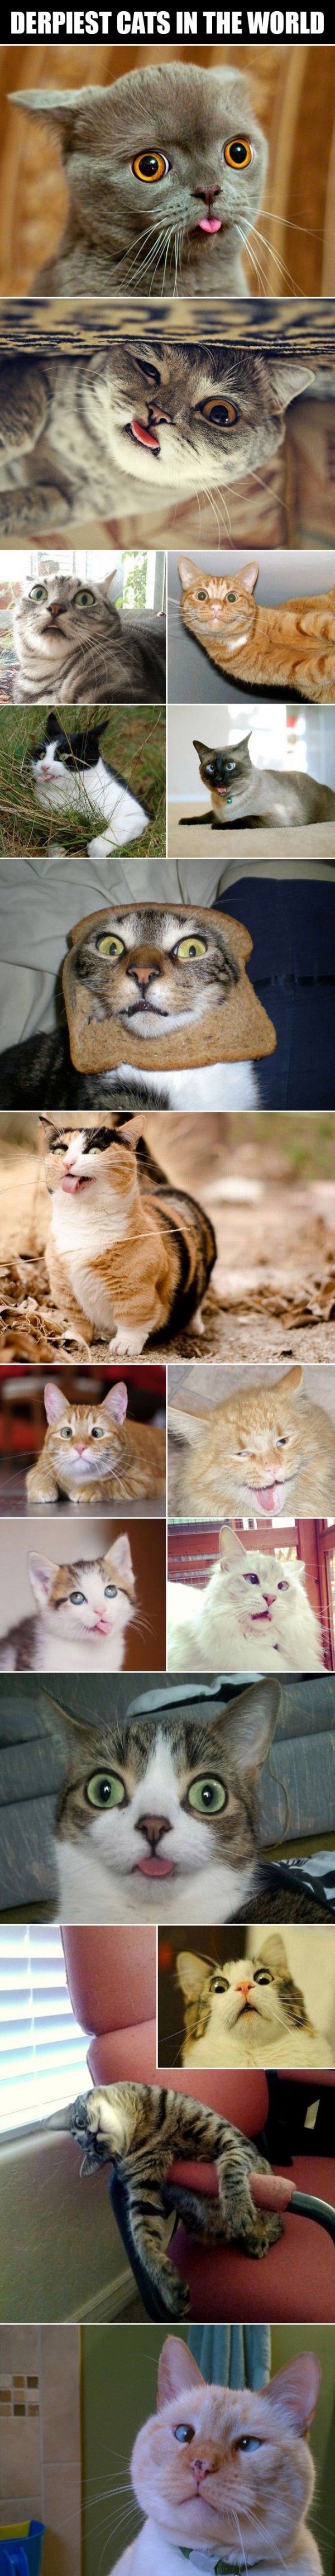 funny-pictures-derpiest-cats-world-600x4611.jpg